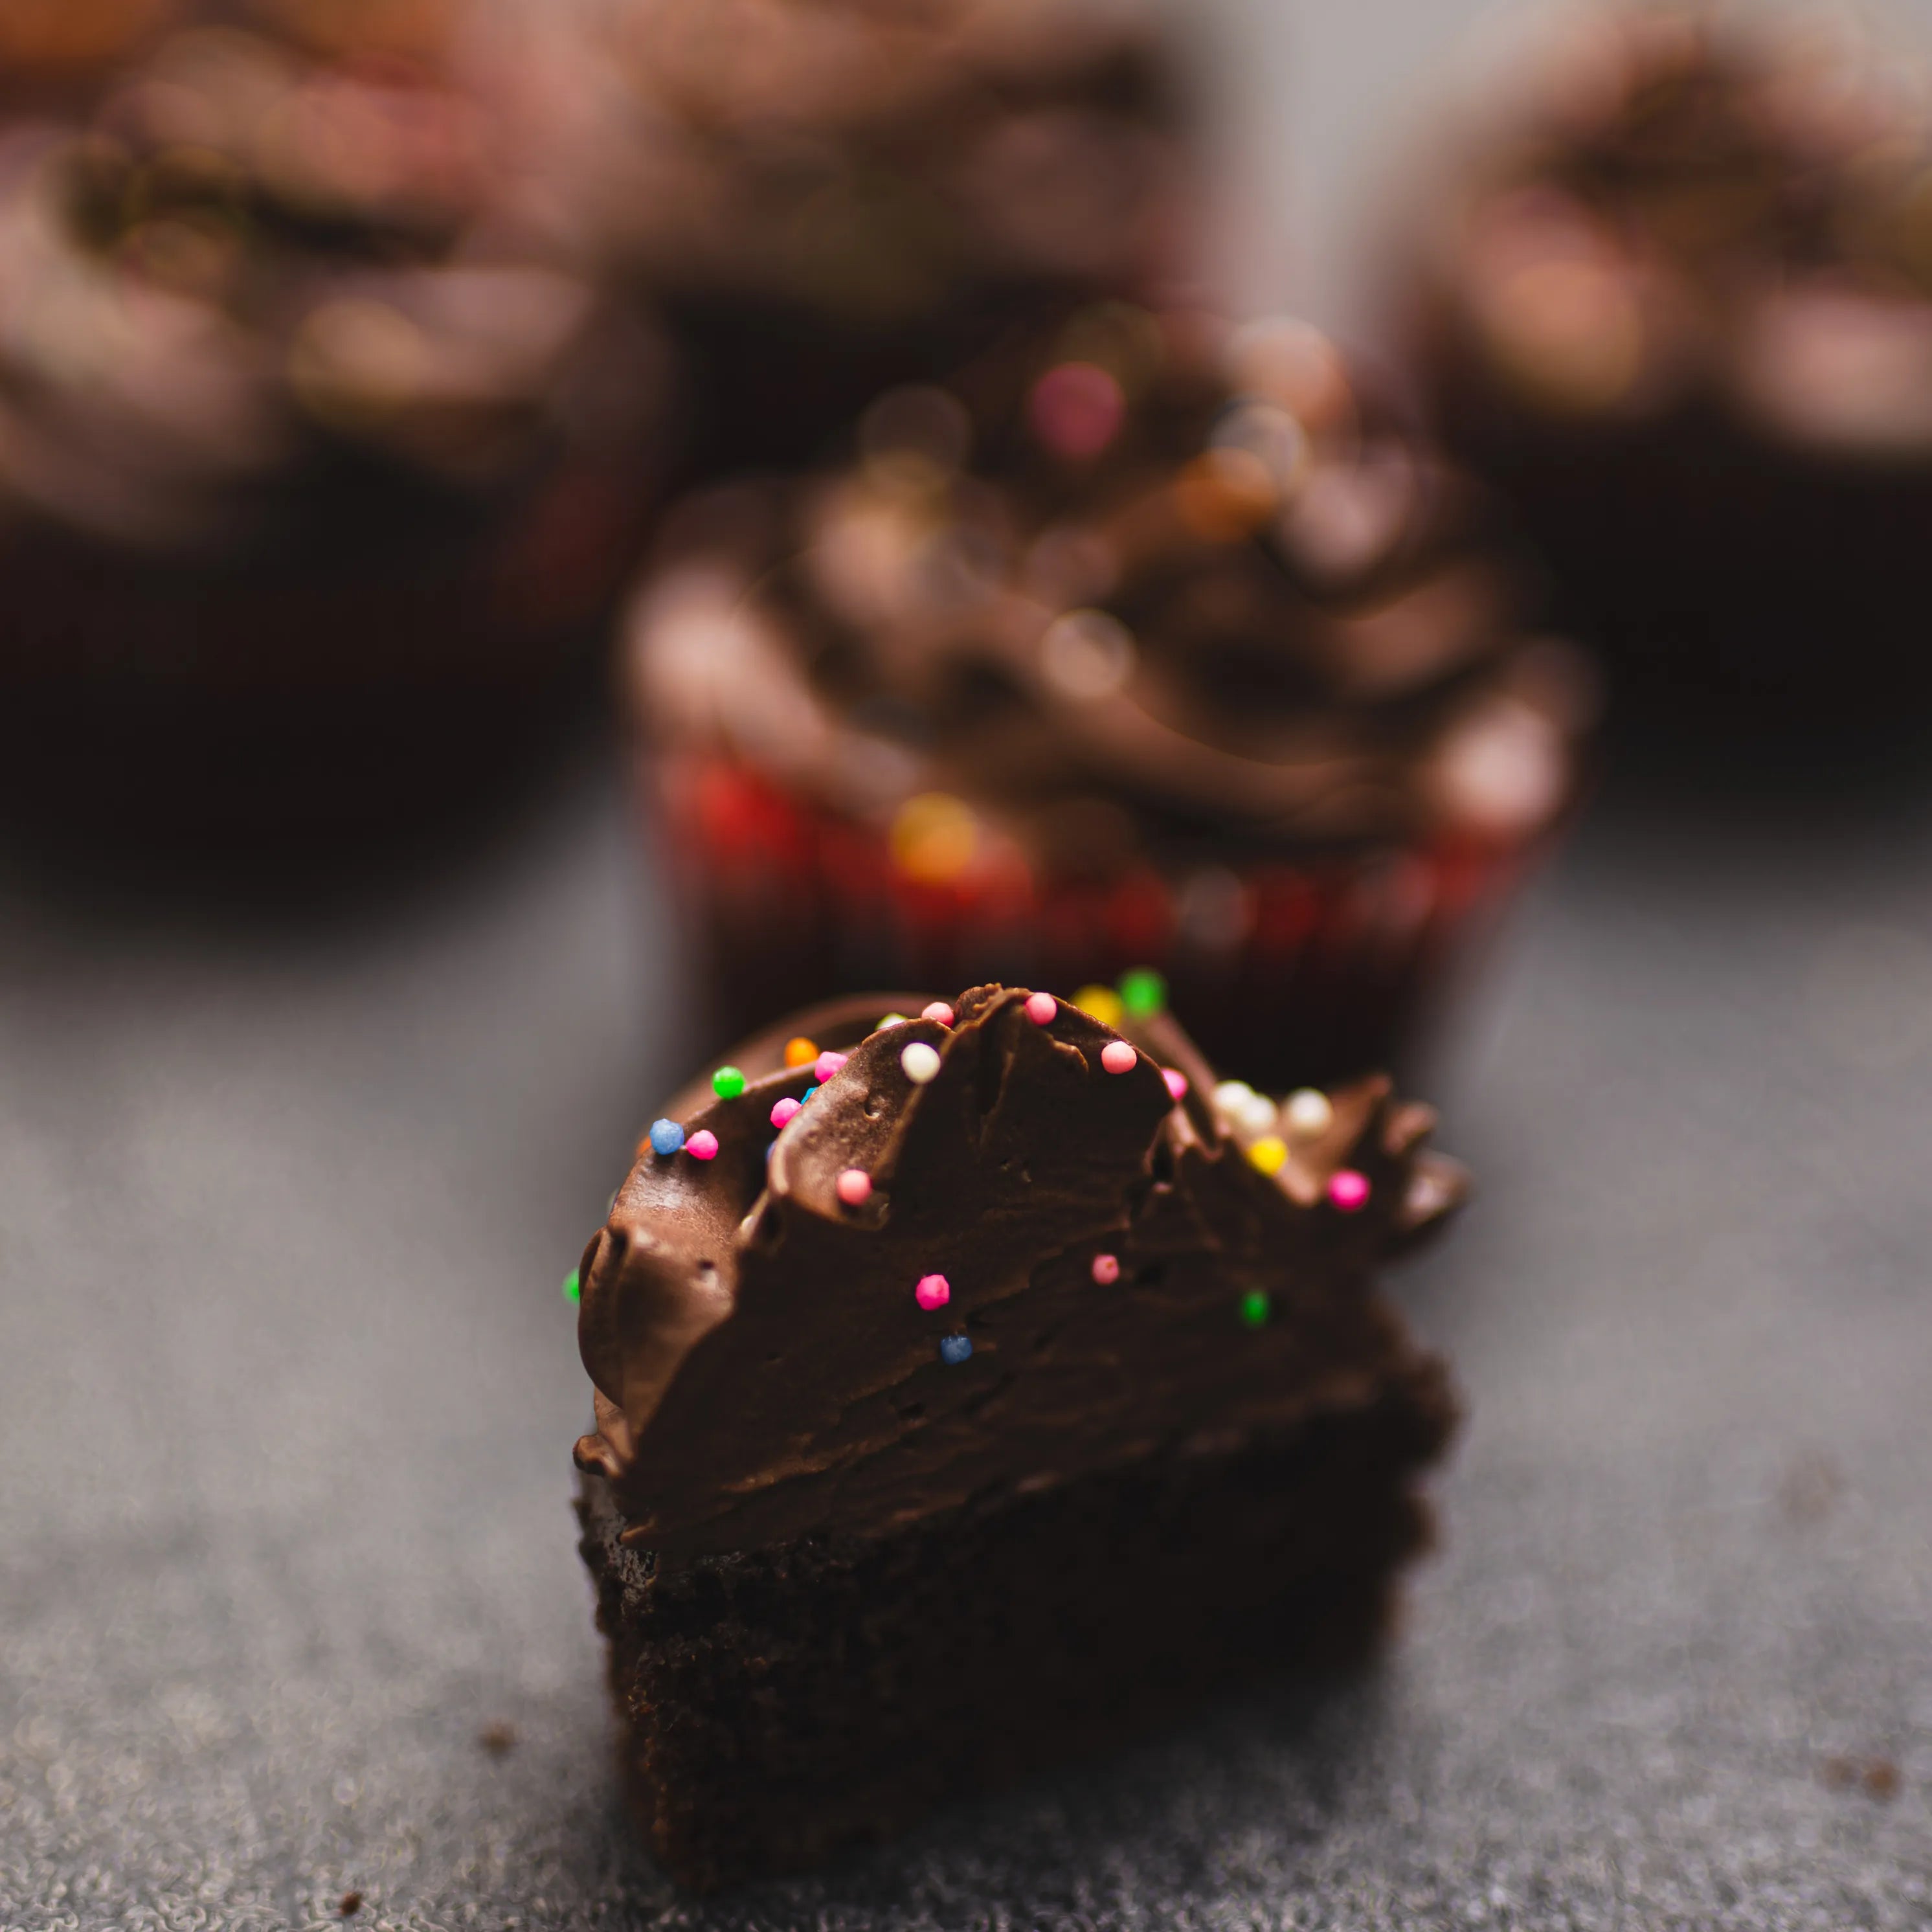 Decadent chocolate cupcakes with fluffy whipped chocolate frosting